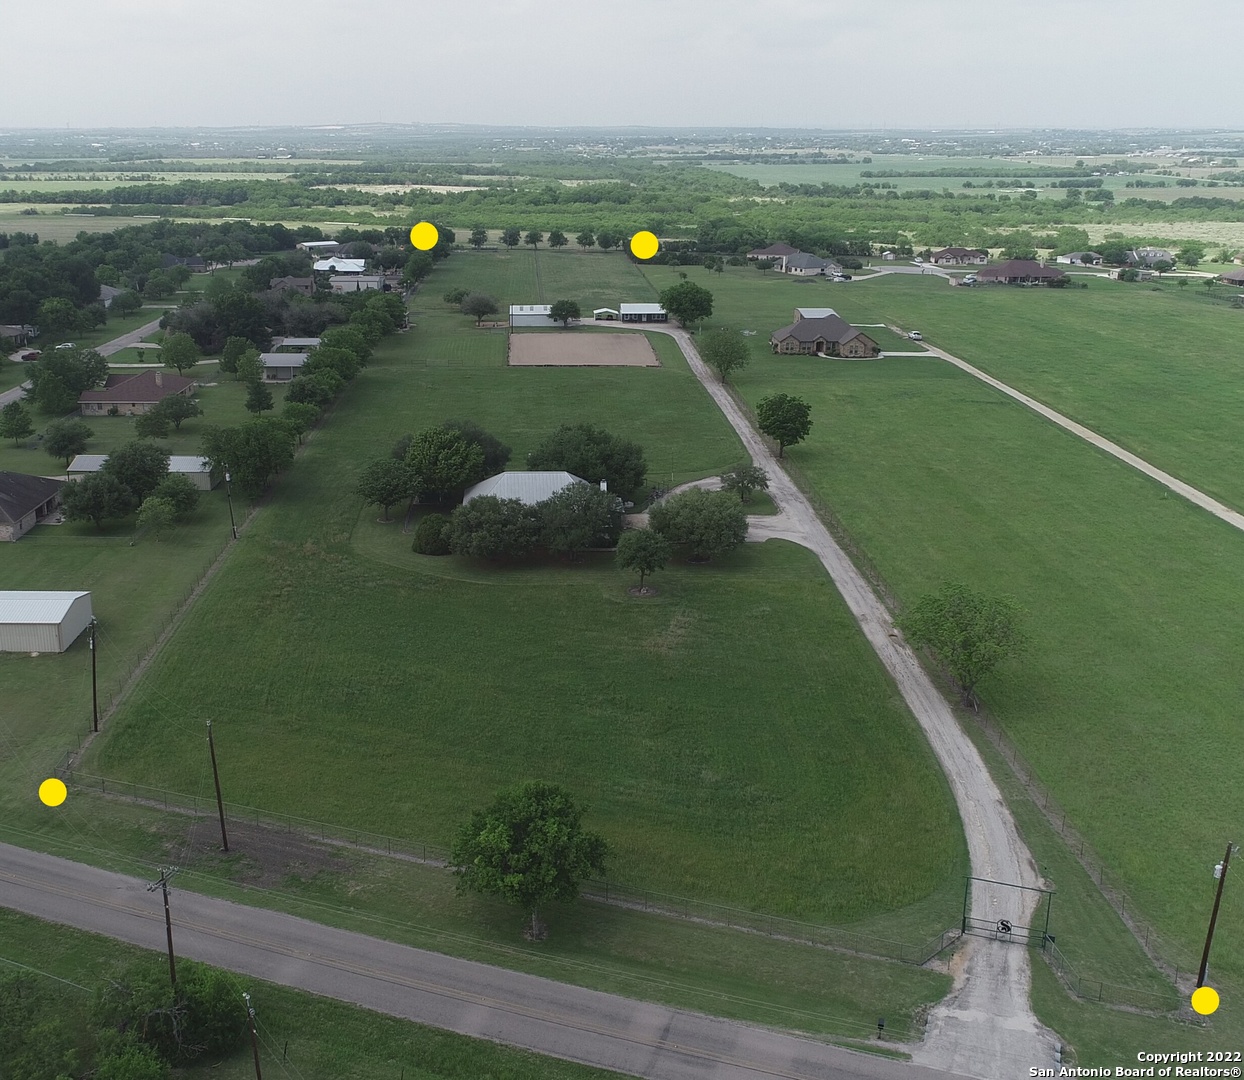 Horse lover's dream property. 2 separate homes on 10 acres. Immaculate and meticulously maintained with everything a person could want or need for a horse property in highly desirable Marion TX located in Guadalupe County. 10 acres, 2 houses, 2 outbuildings/shops, 4 stall barn, arena, 3 pastures, and coastal fields used for hay production. Main house is 2893 sqft and the guesthouse is a 1080 sqft home that is perfect for the parents or to rent out for additional income. The barn has indoor/outdoor wash rack